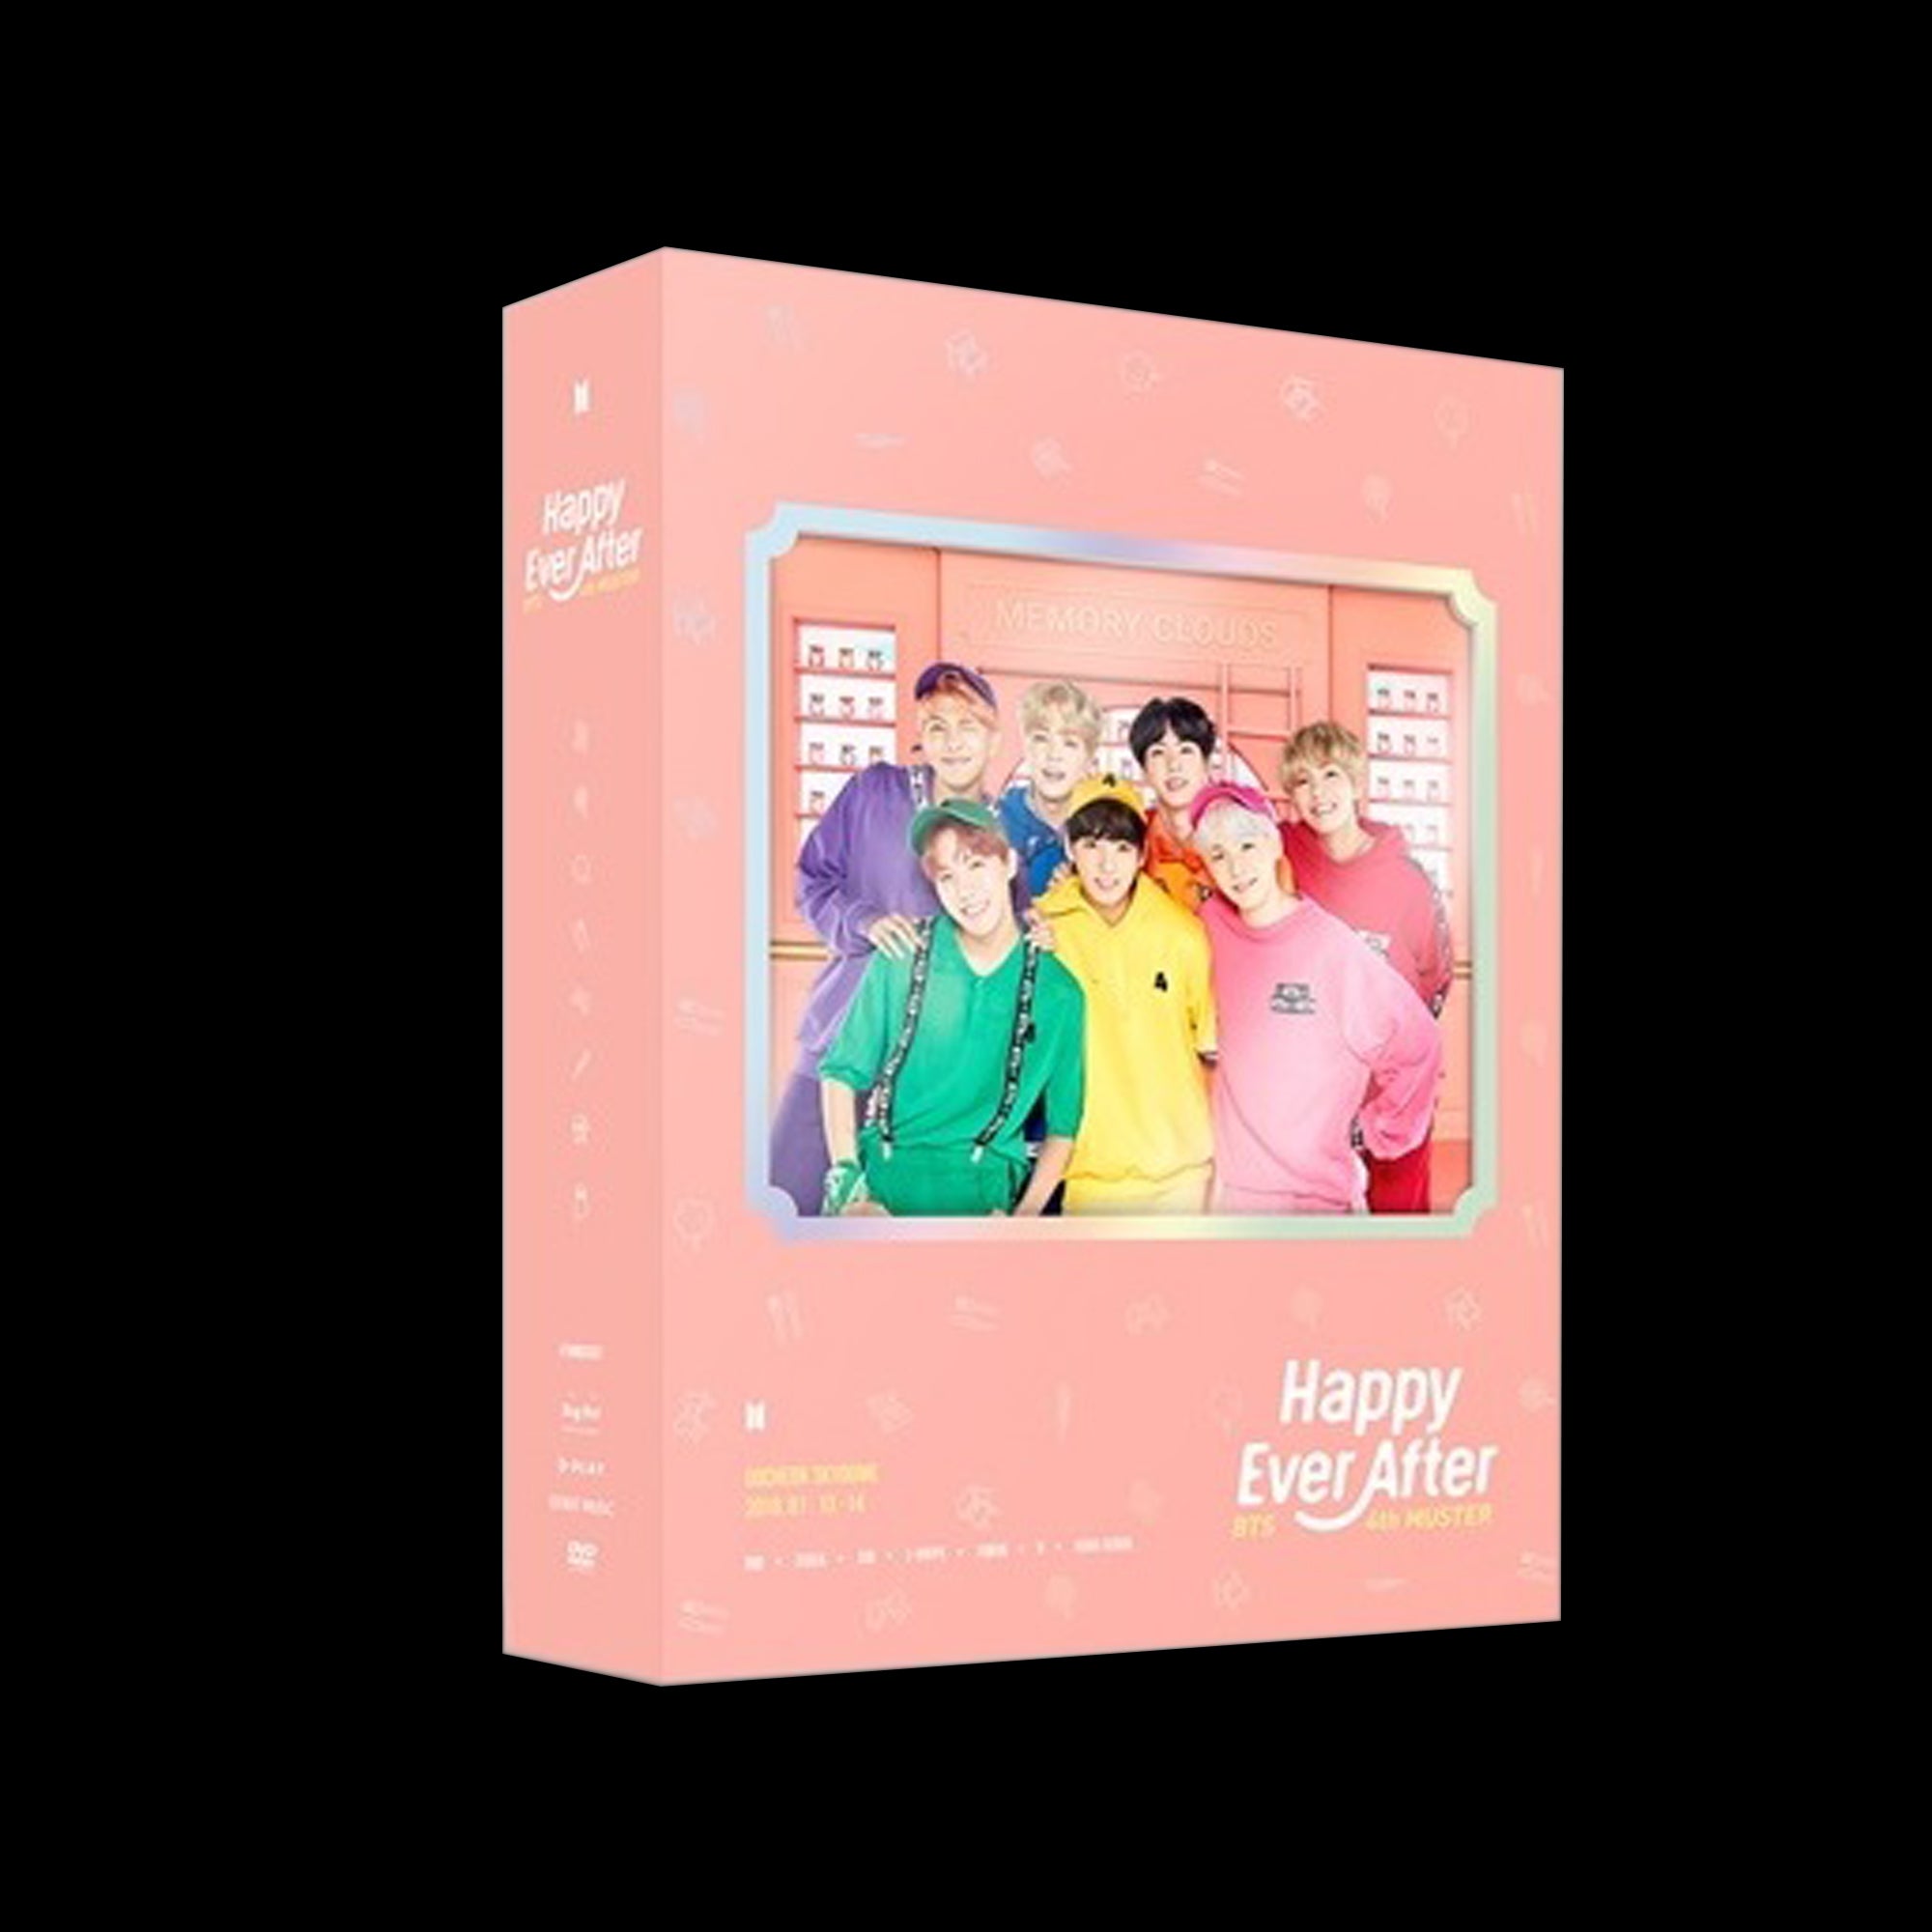 BTS - HAPPY EVER AFTER DVD